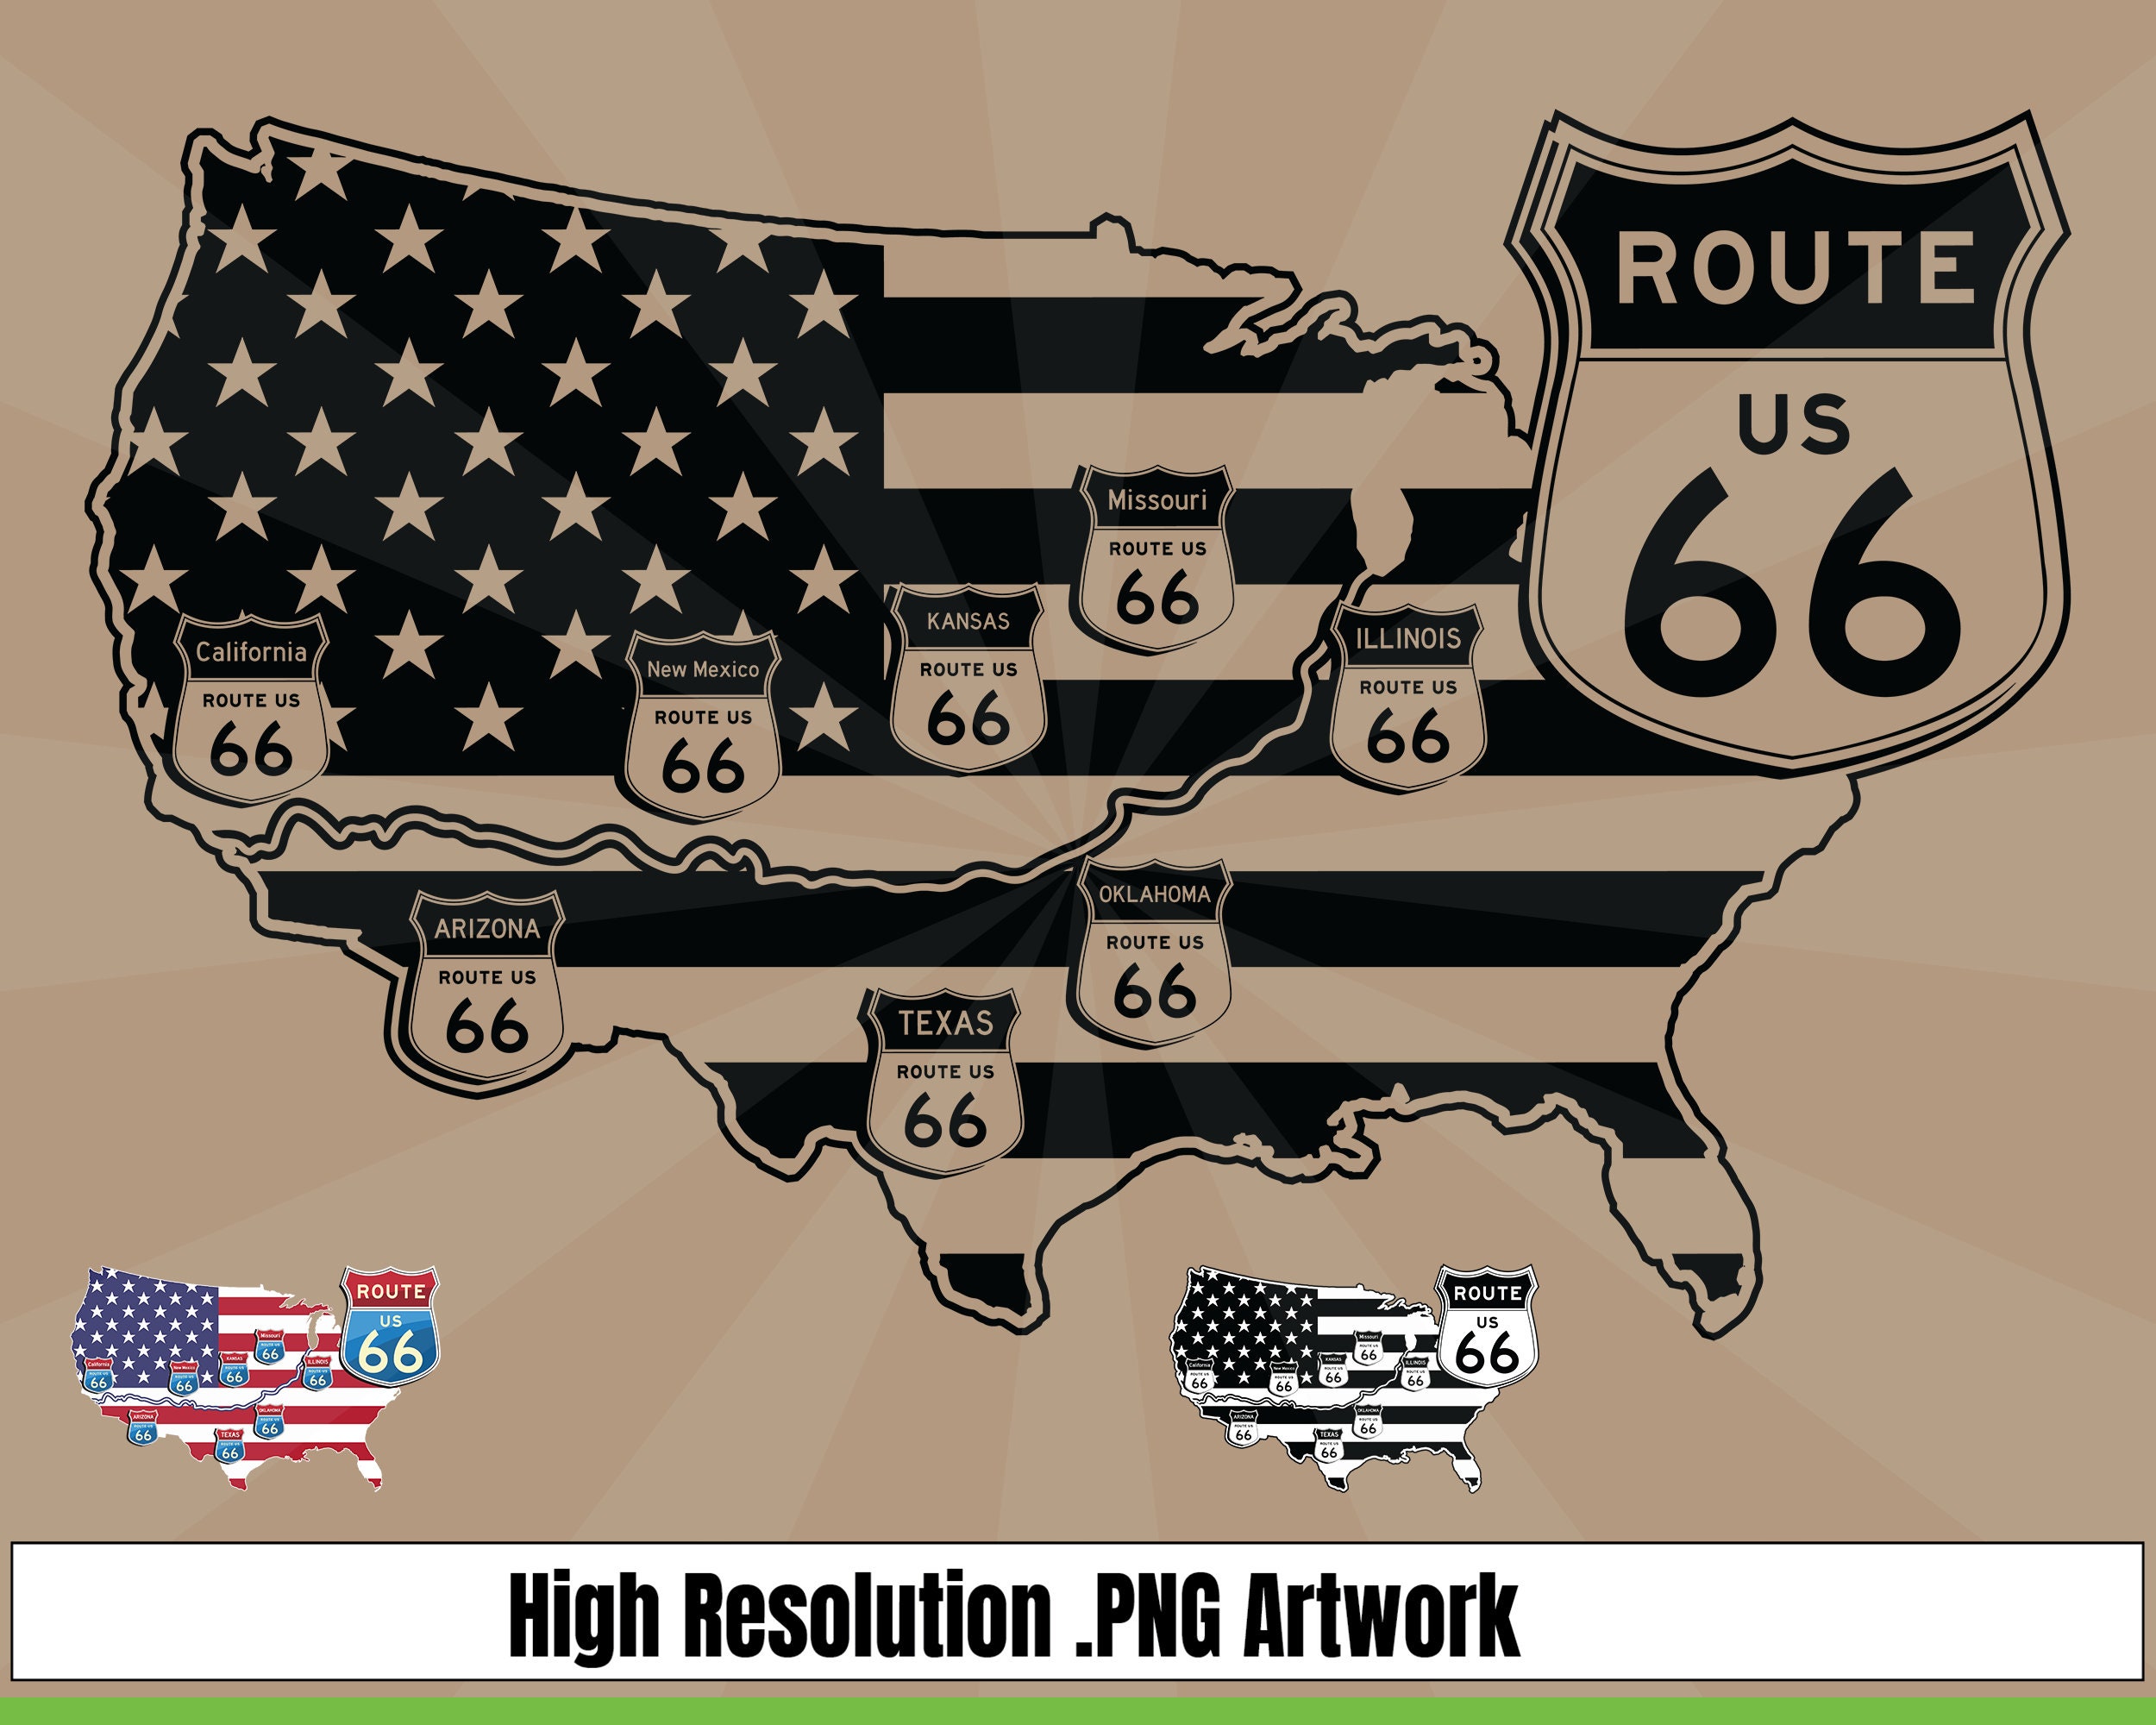 Route 66 American Flag Vintage Metal Novelty Stop Sign